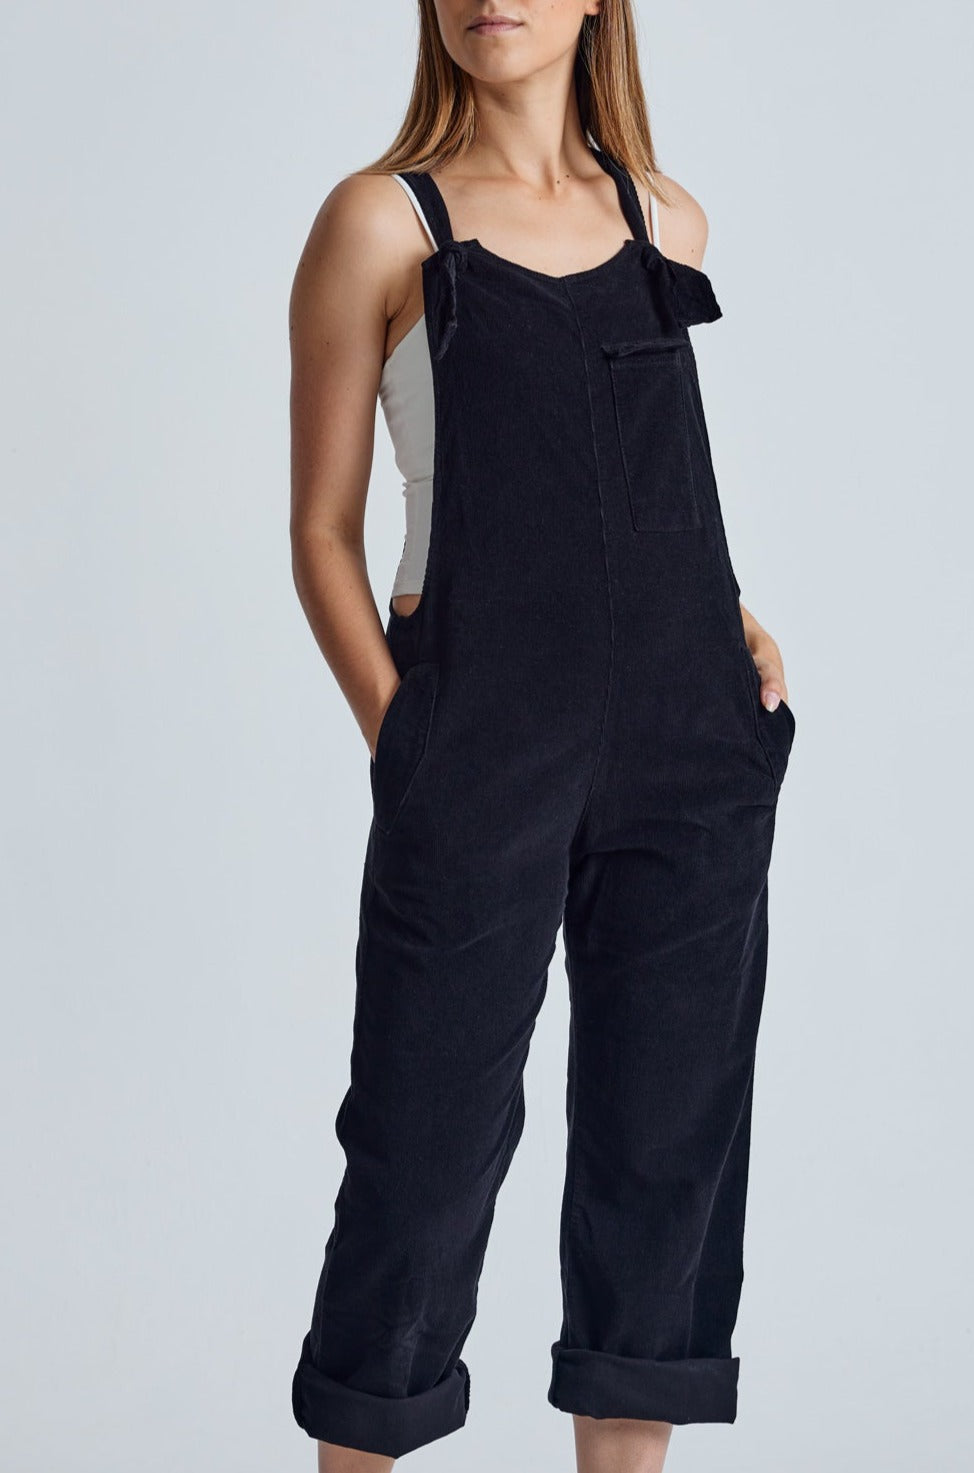 MARY-LOU Black - Organic Cotton Cord Dungarees by Flax & Loom